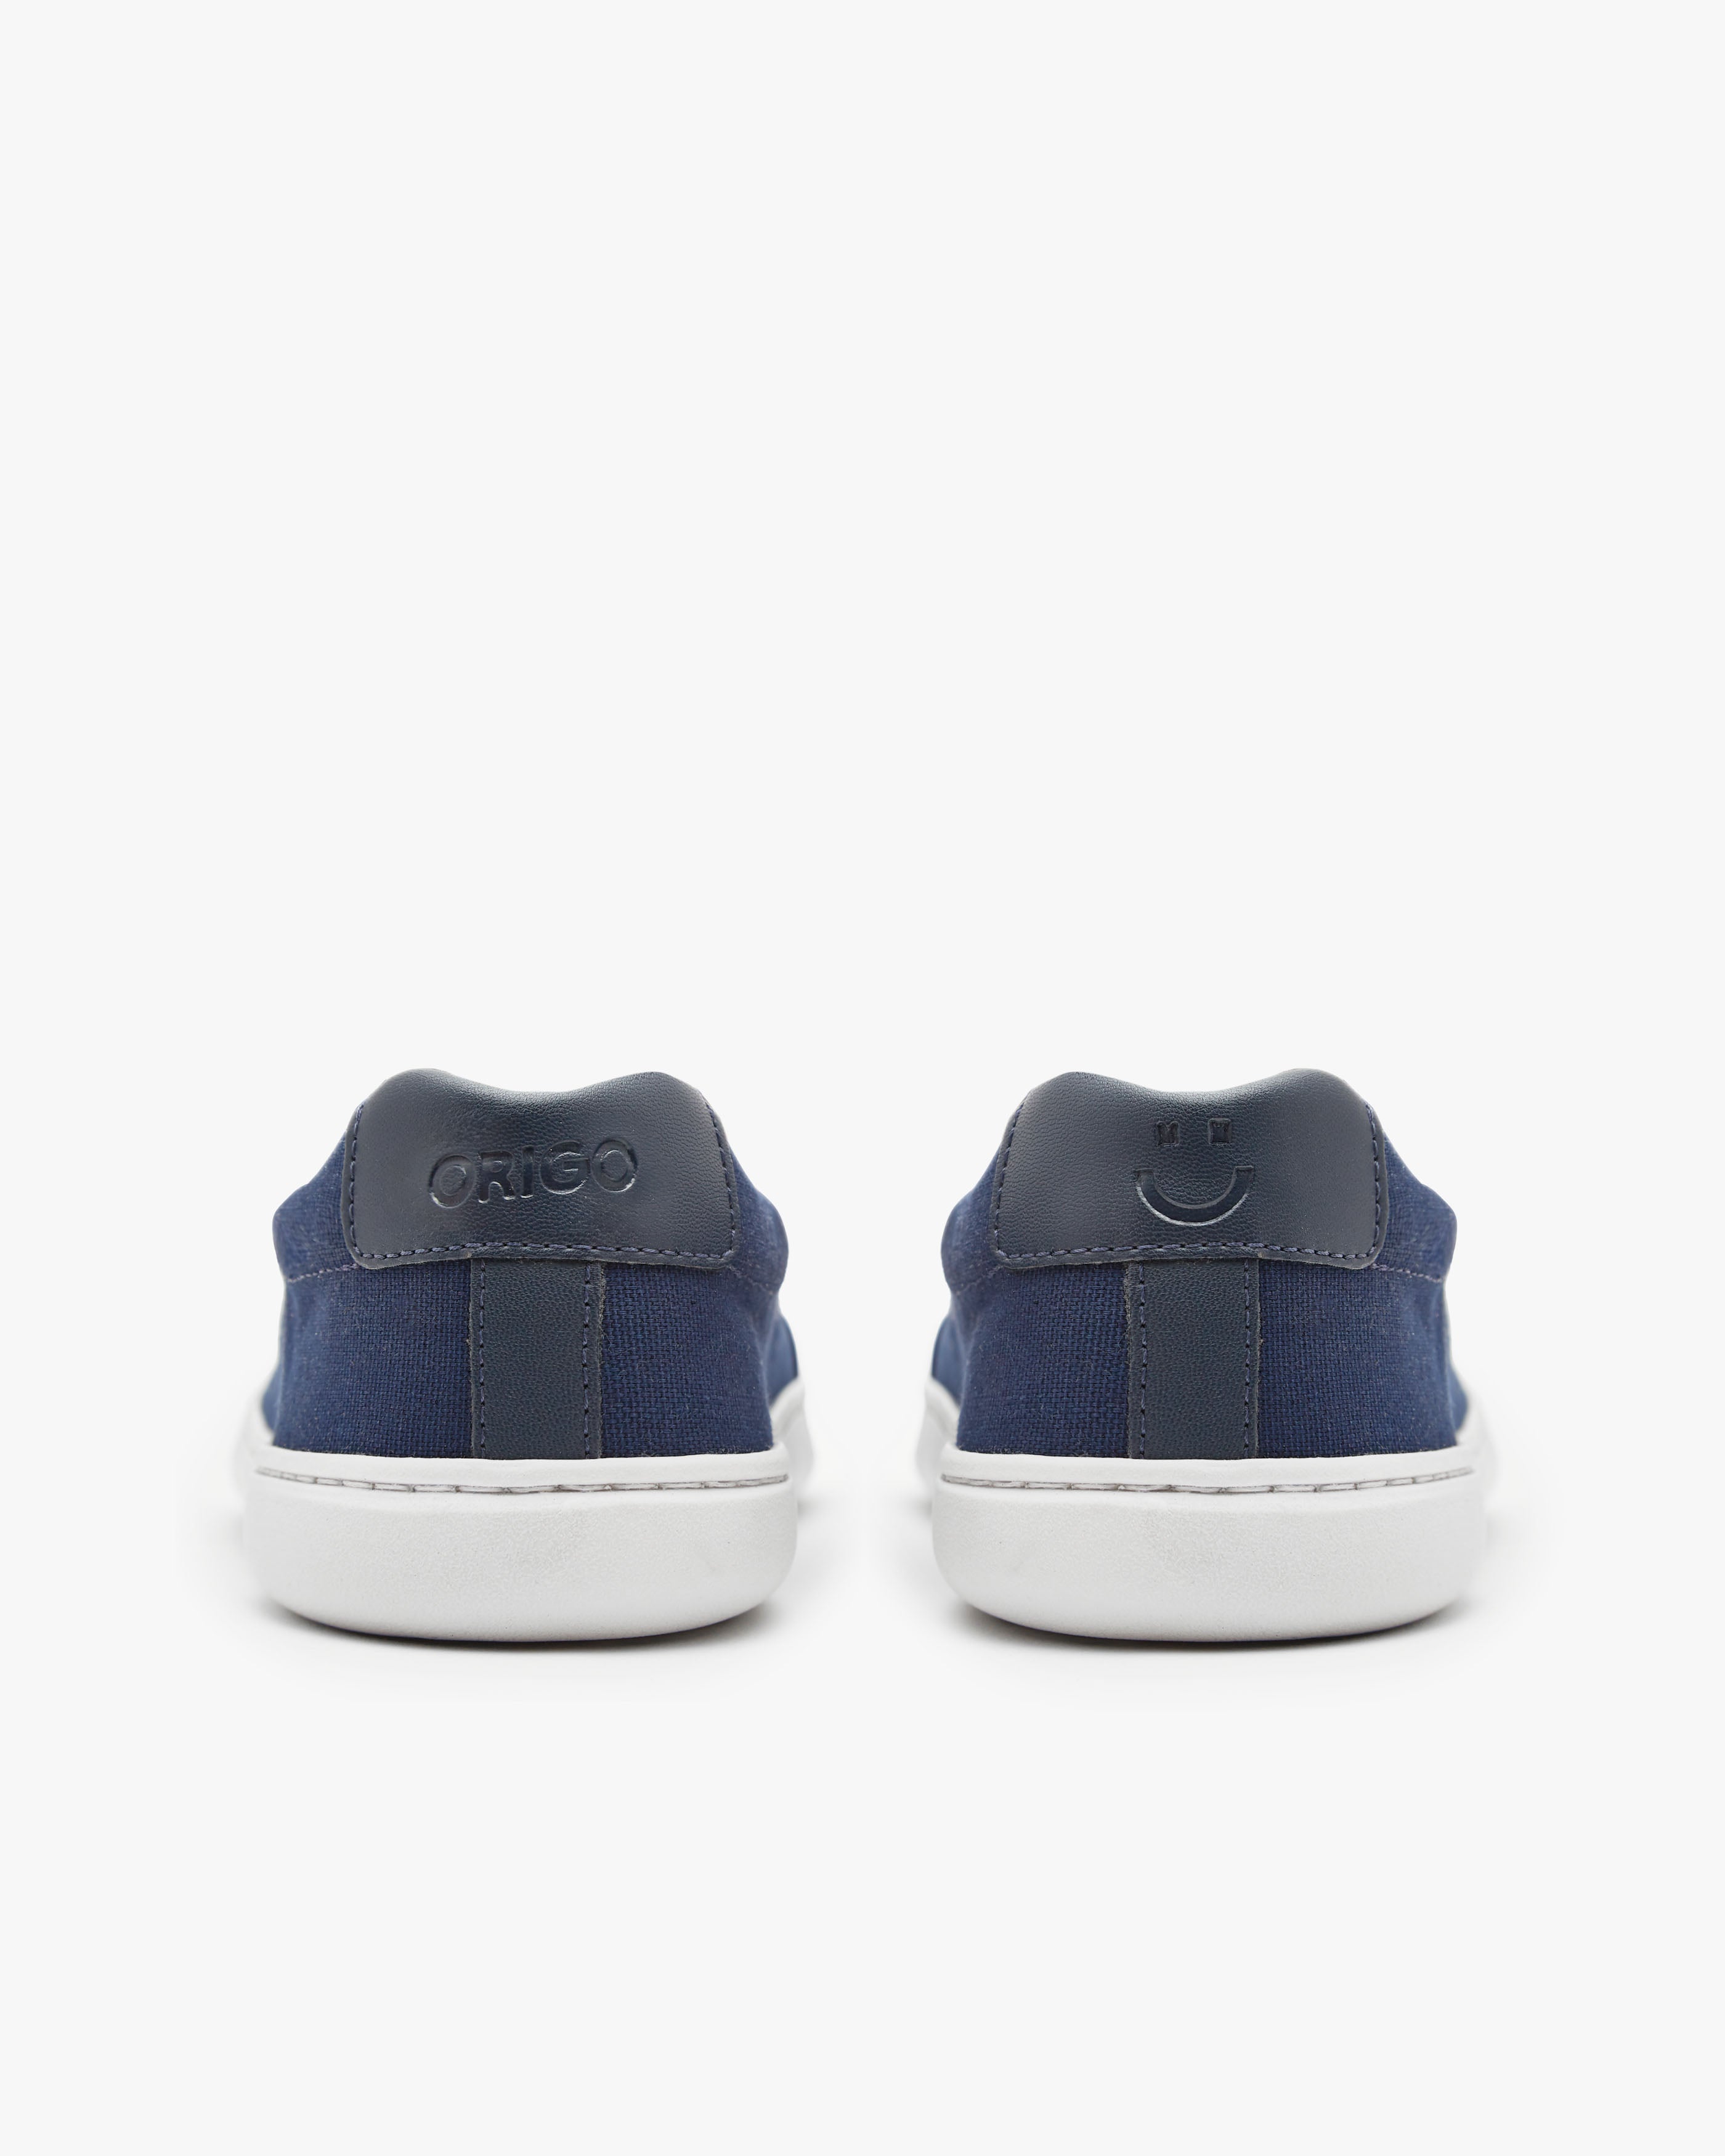 The Everyday Sneaker for Men | Gen 3 in Cotton Canvas-6